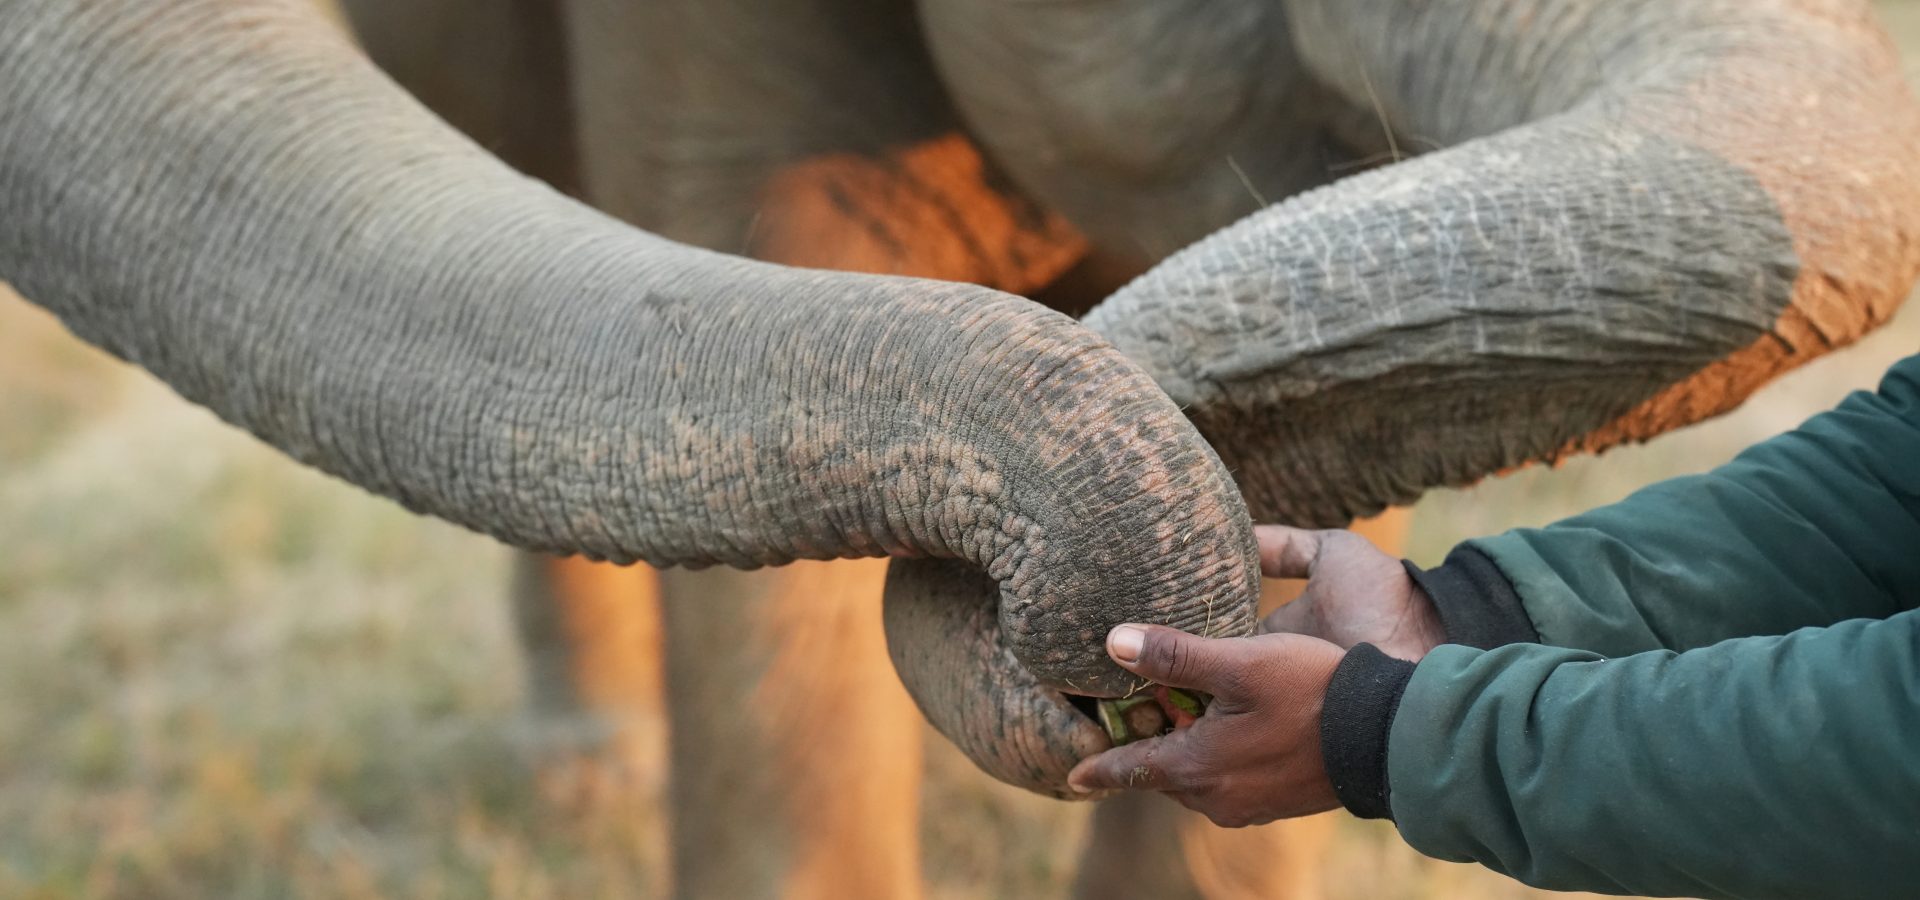 Elephant Aid International - Fun Facts Friday: The Elephant Trunk An elephant's  trunk is a combination of the nose and the upper lip. The nasal cavity runs  the length of the trunk